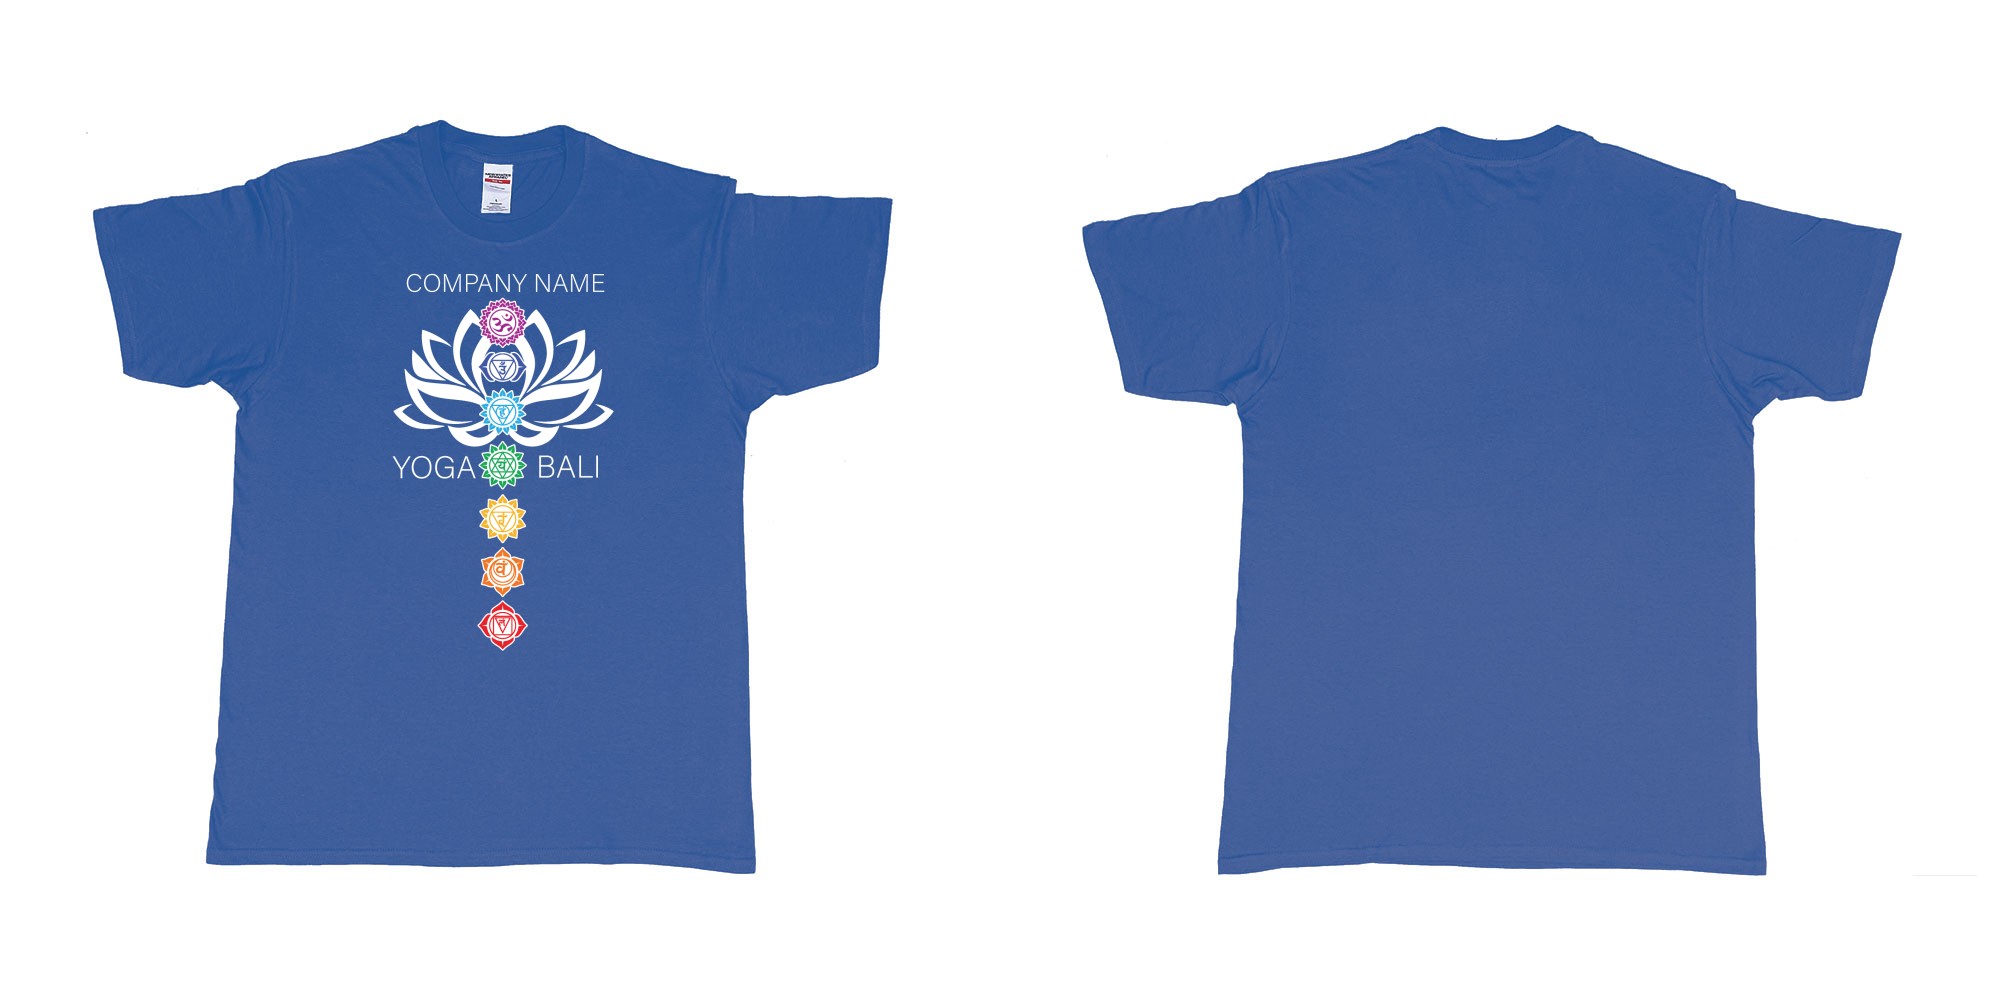 Custom tshirt design lotus flower chakras yoga hindi symbols for custom teeshirt printing in fabric color royal-blue choice your own text made in Bali by The Pirate Way